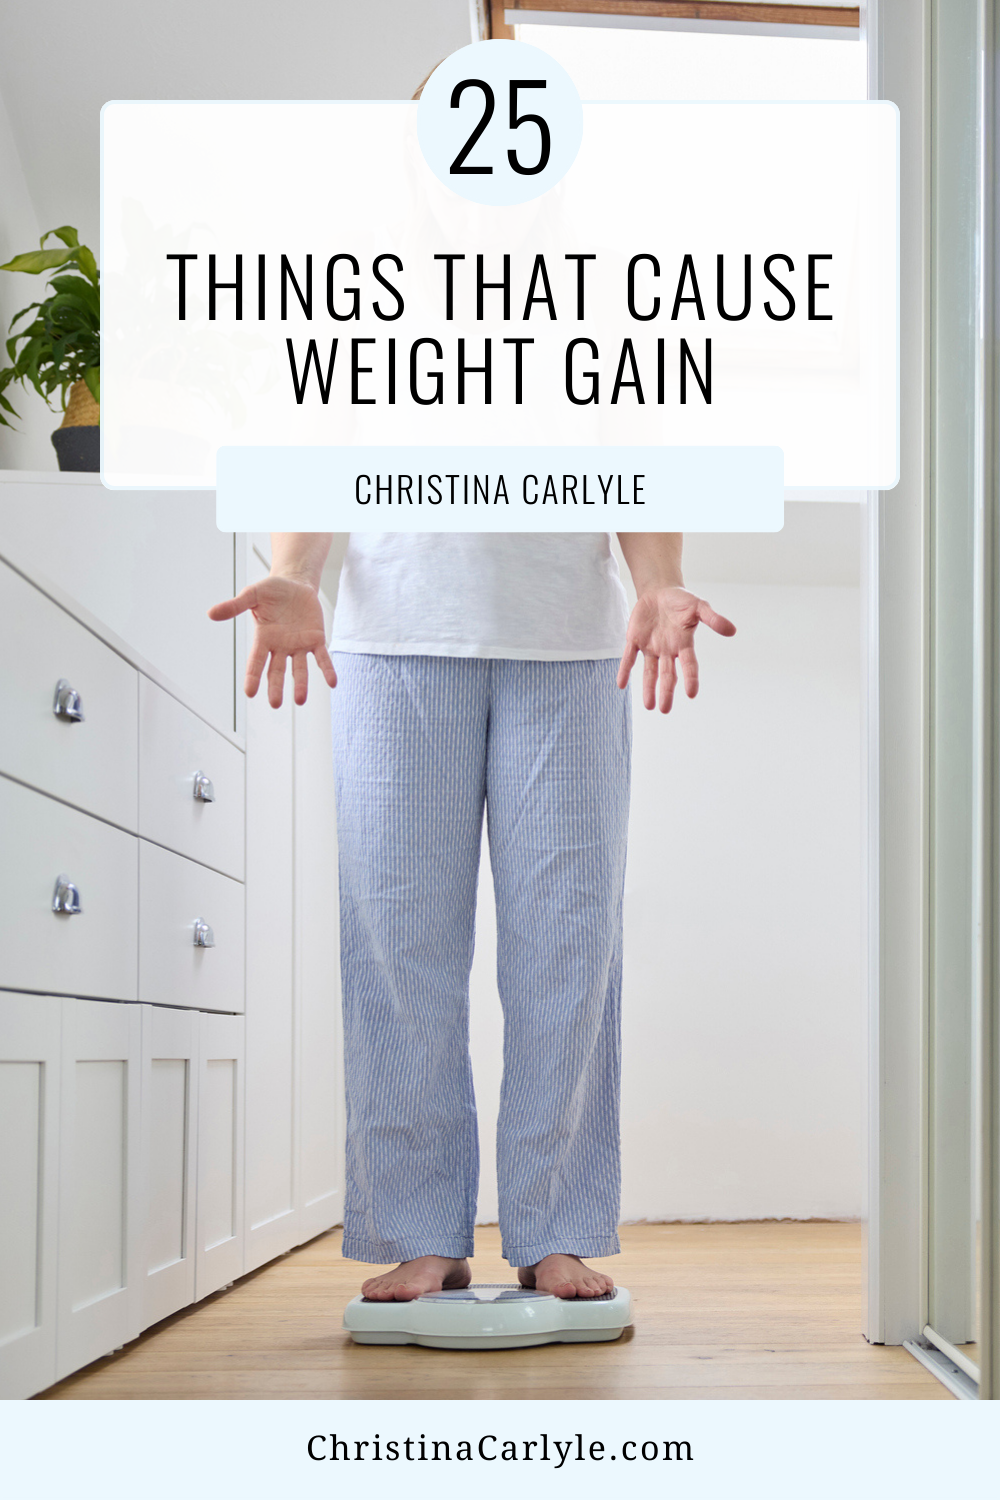 text that says 25 things that cause weight gain and a frustrated woman standing on a scale